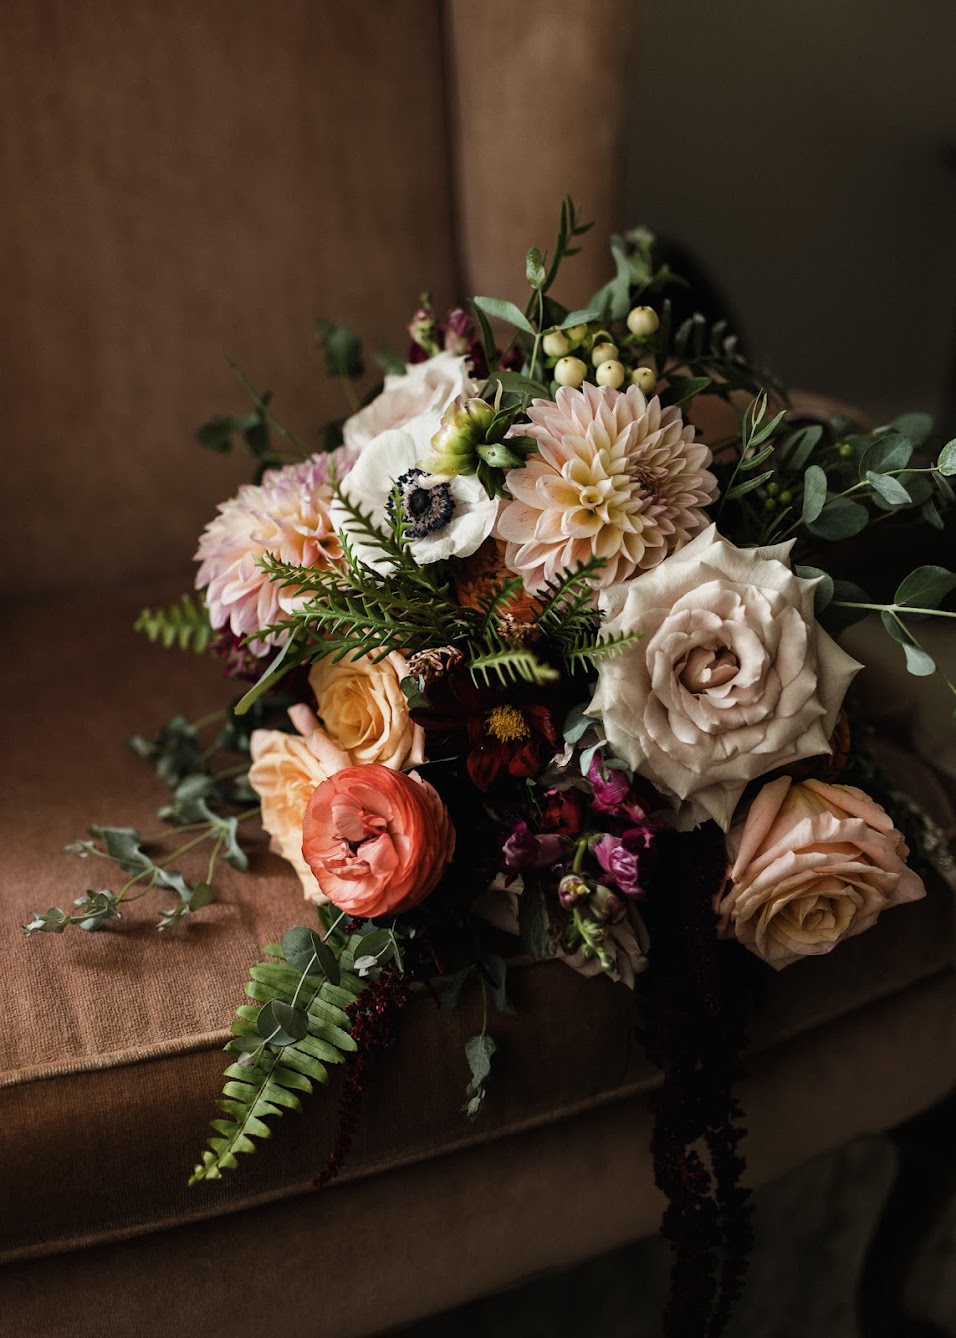 Bride's bouquet with roses and ferns